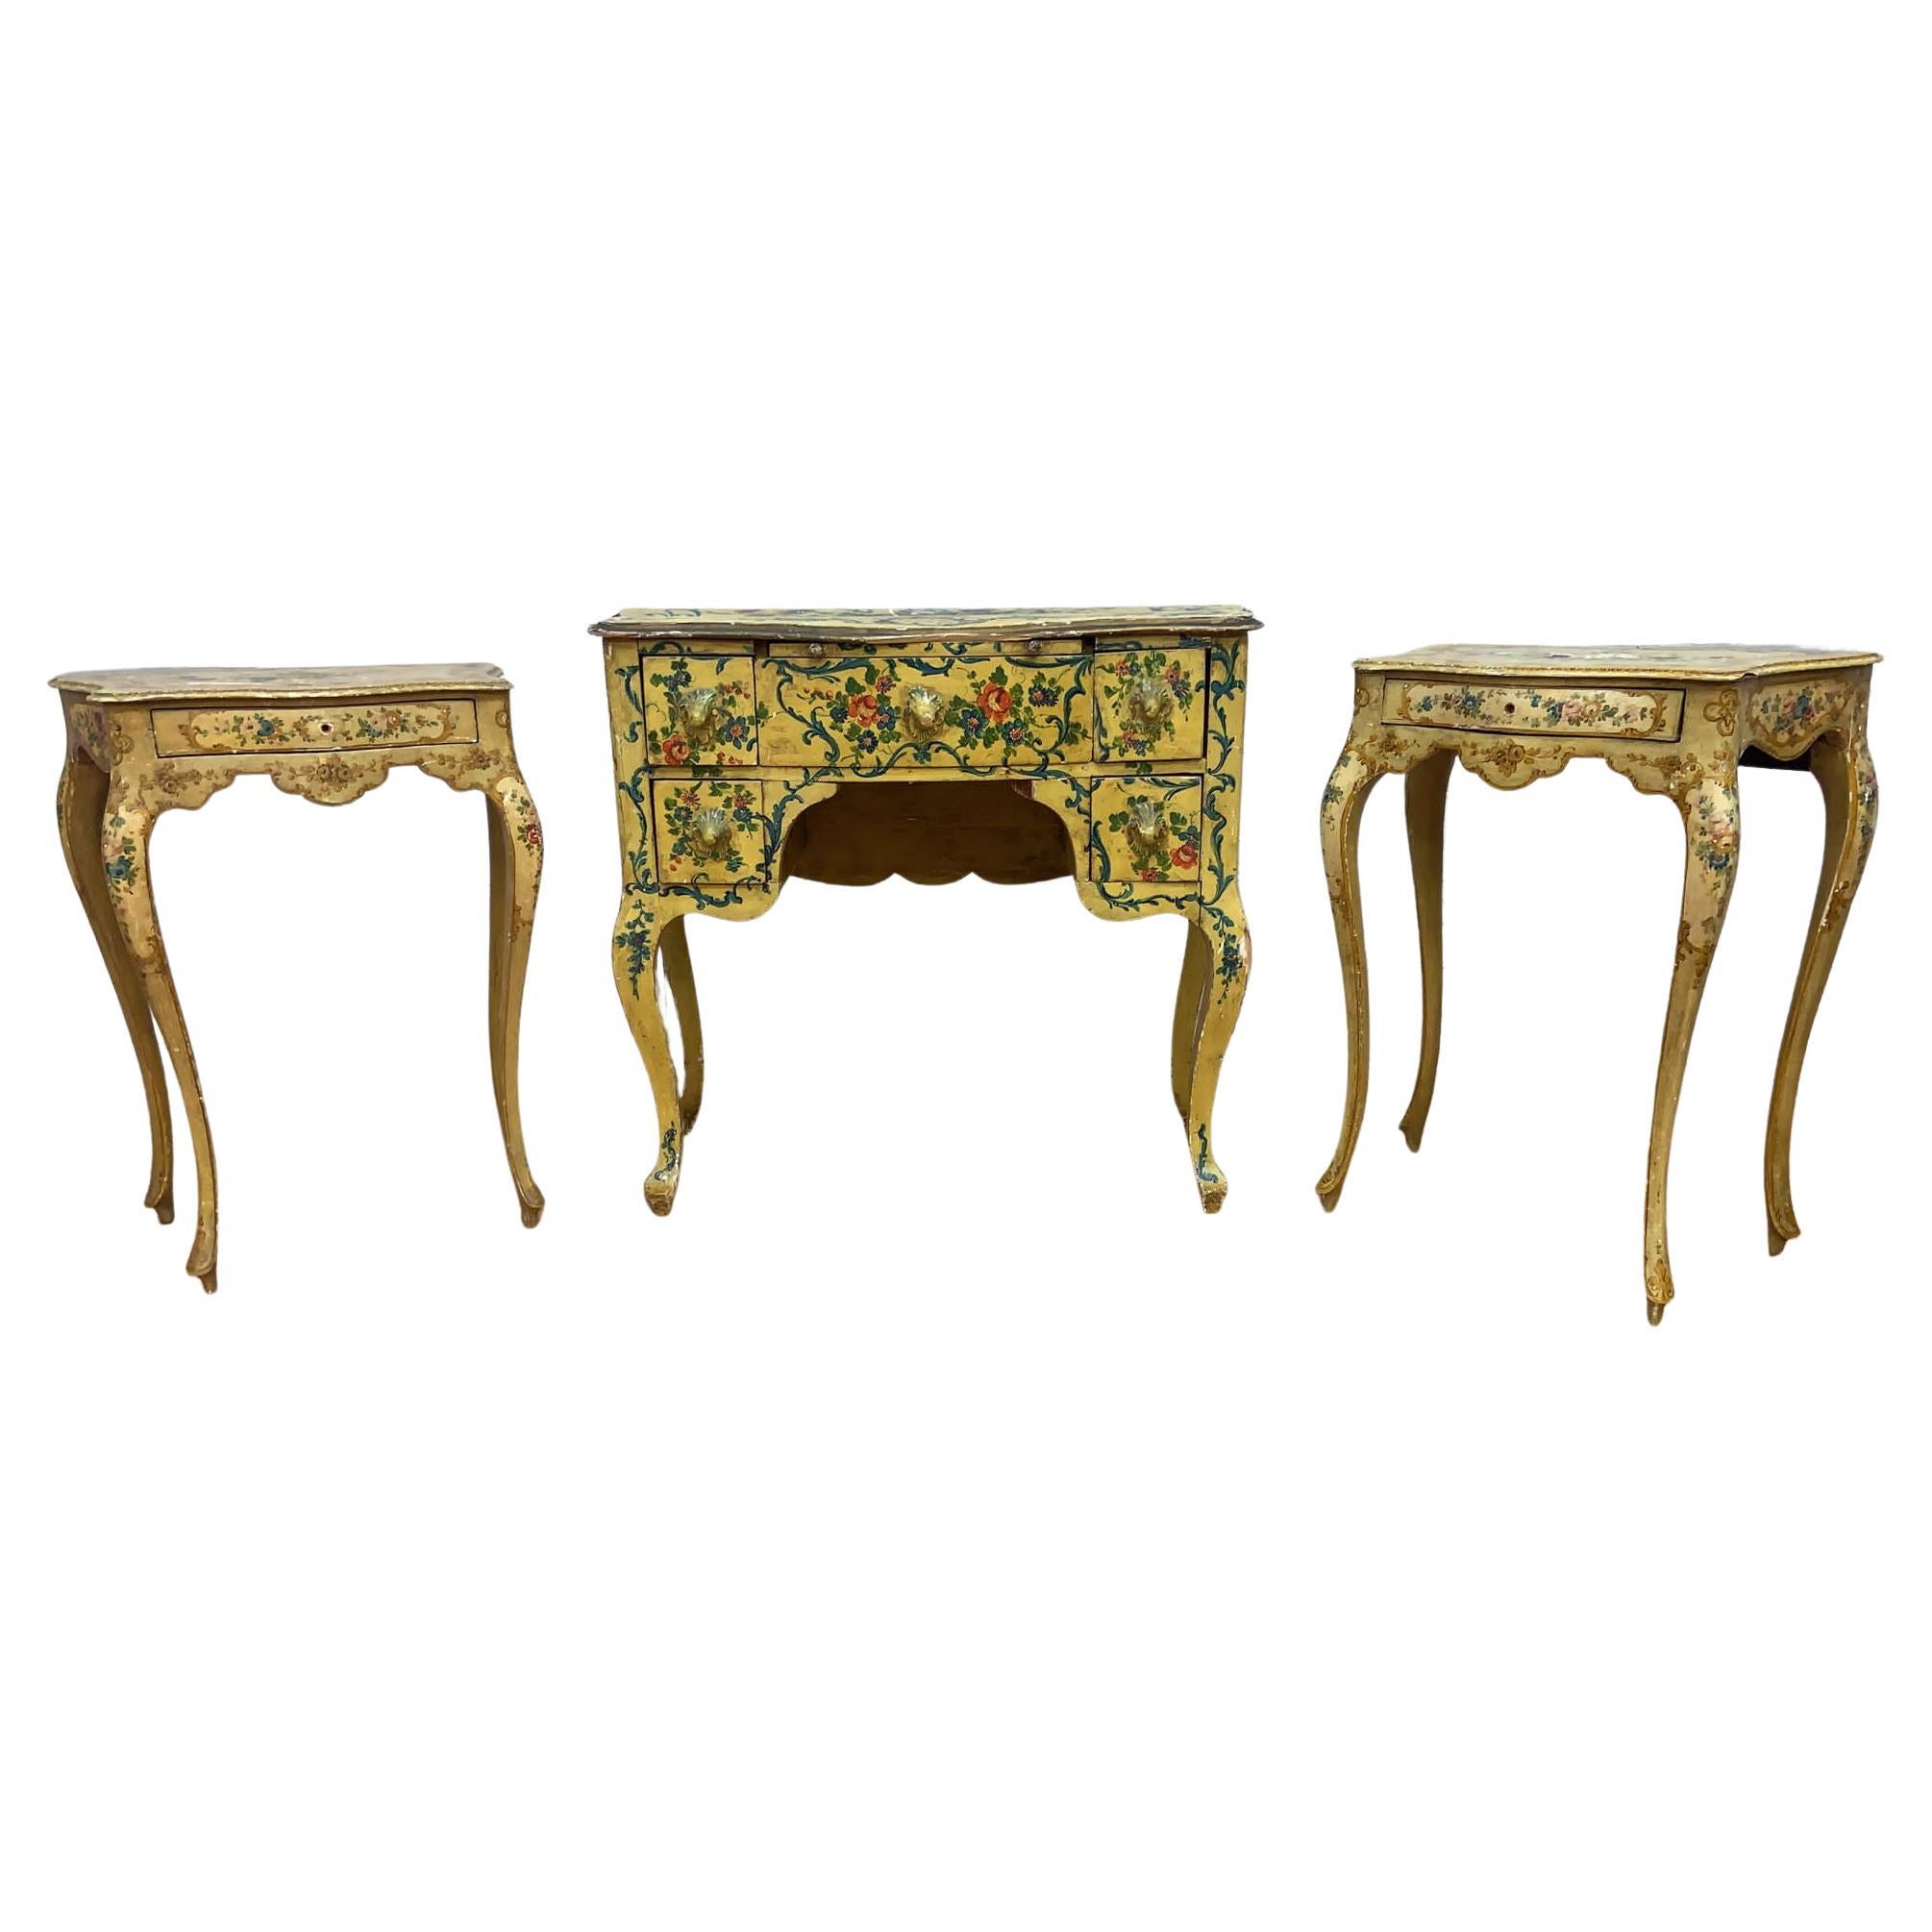 Antique Rococo Style Venetian Hand Painted Vanity Desk & Side Tables, Set of 3 For Sale